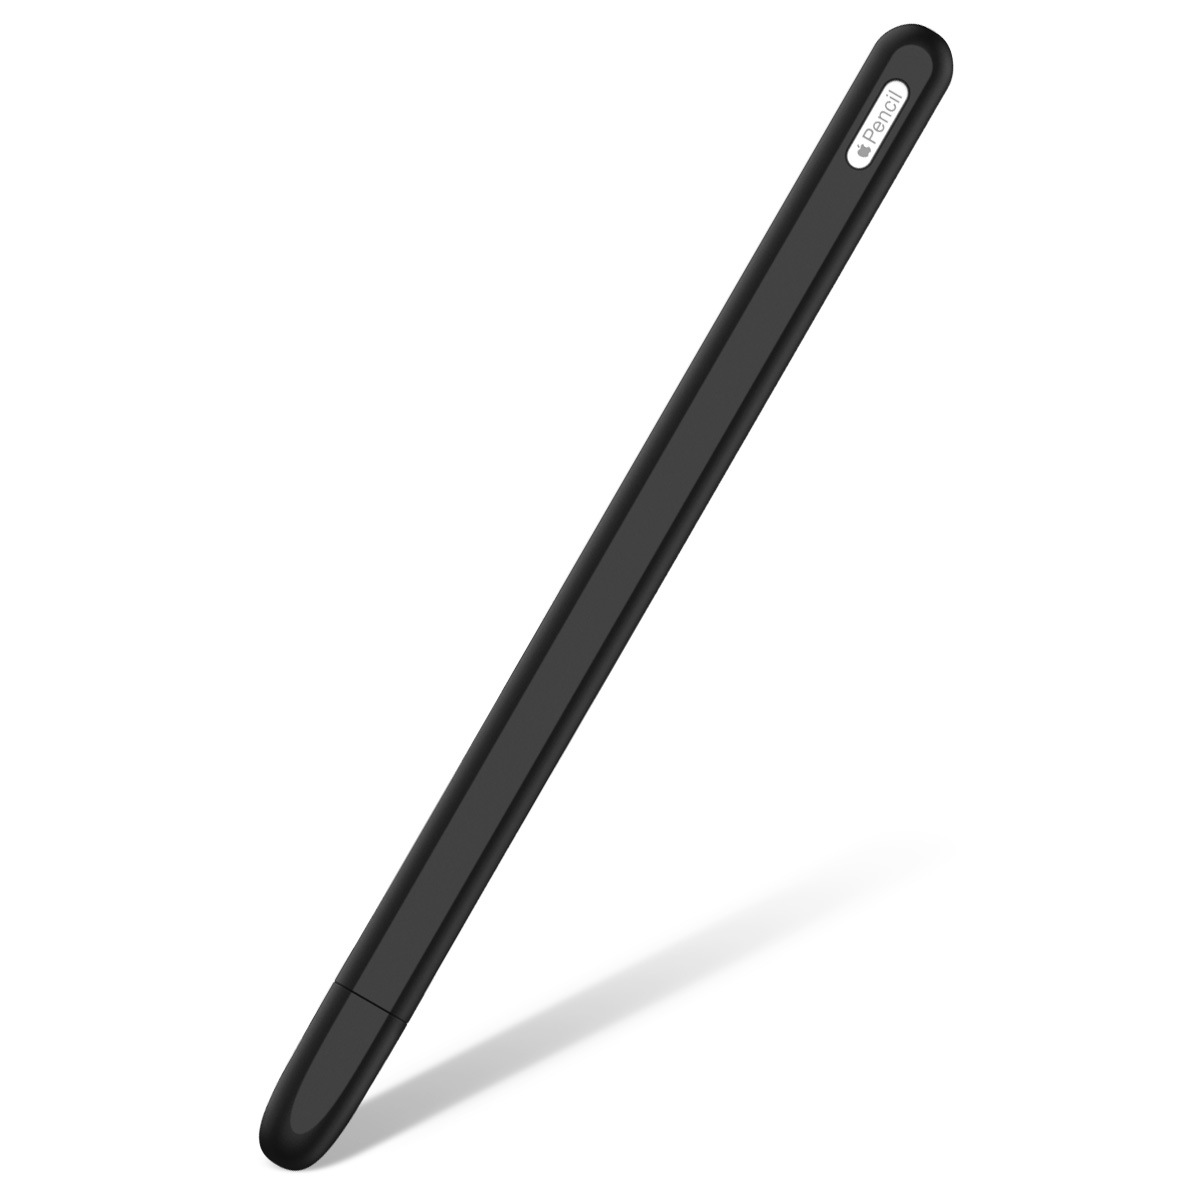 Bakeey Anti-slip Anti-fall Silicone Touch Screen Stylus Pen Protective Case for Apple Pencil 2nd Generation